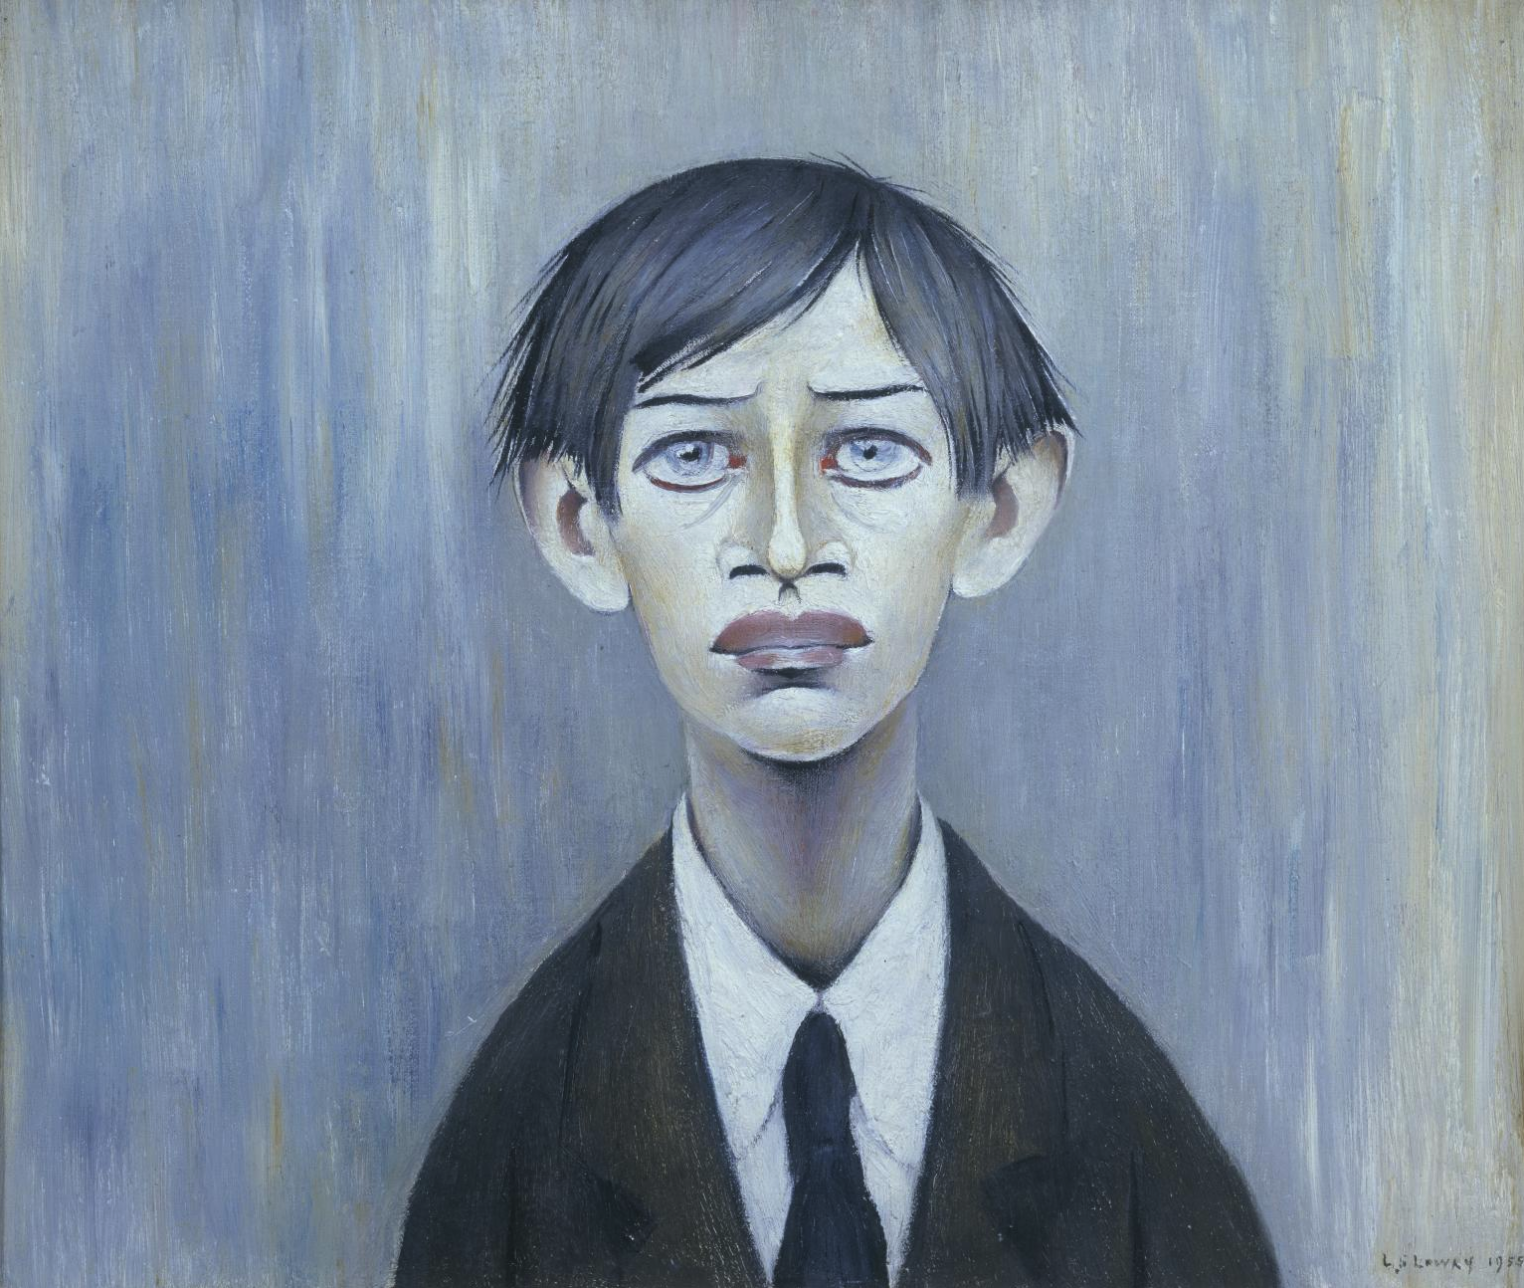 A Young Man (1955) by Laurence Stephen Lowry (1887 - 1976), English artist.